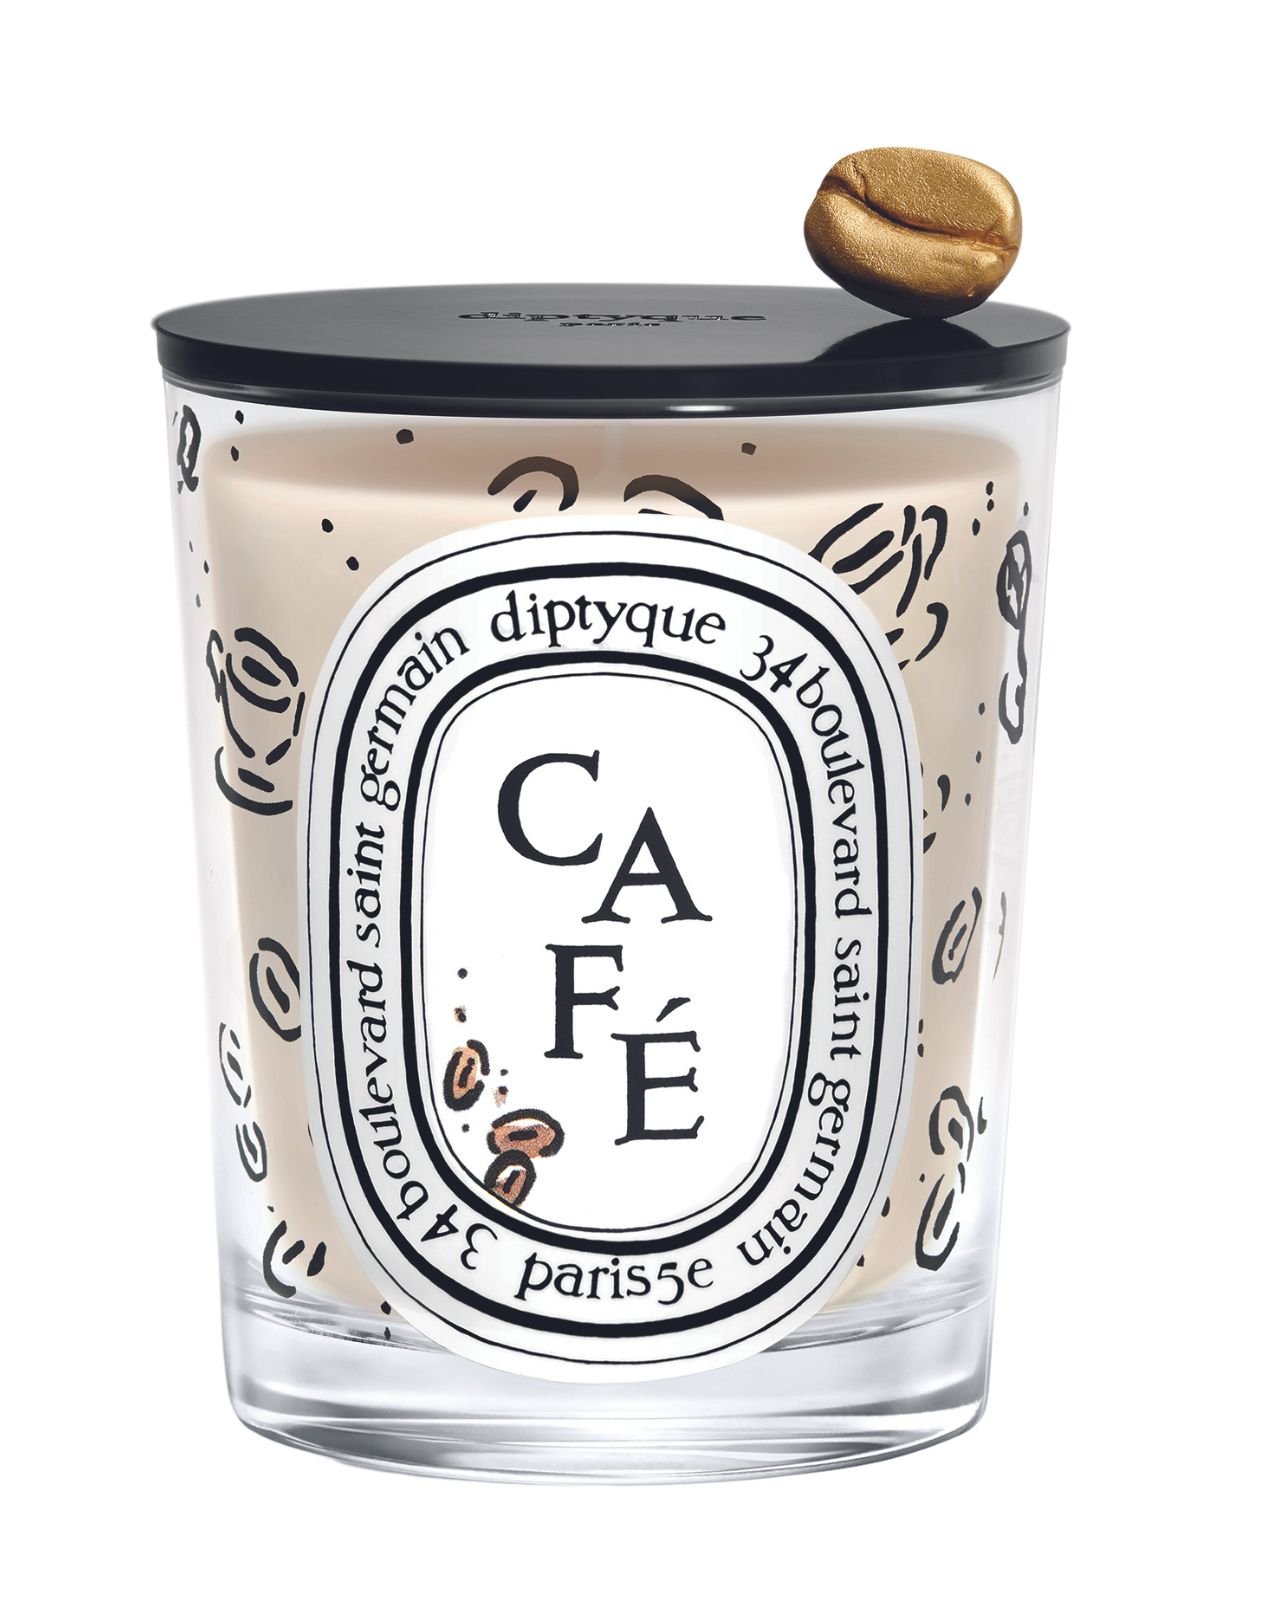 Diptyque candle with black lid featuring a gold coffee bean